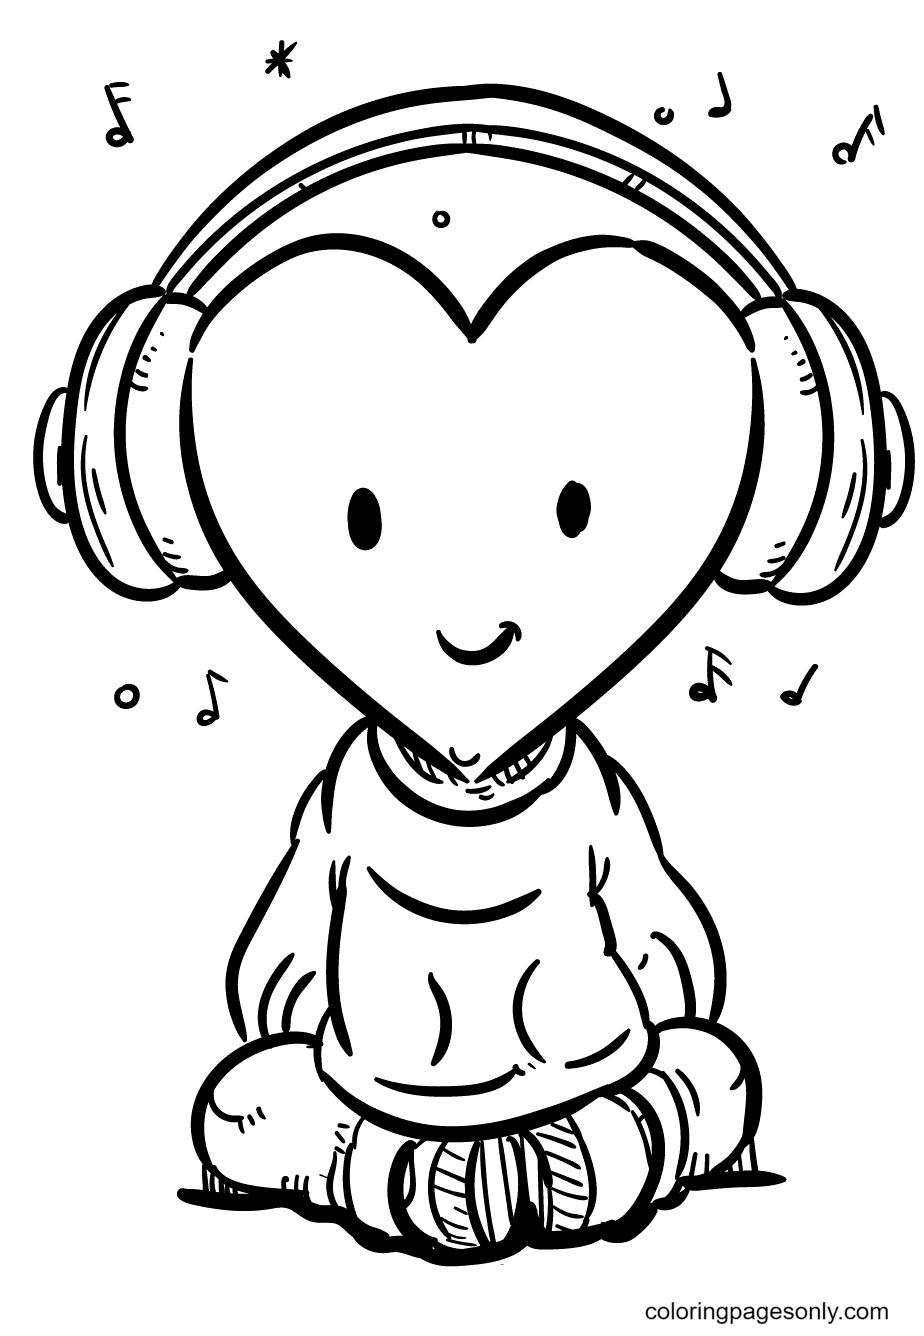 Boy with Heart Shaped Head Listening To Music Coloring Pages